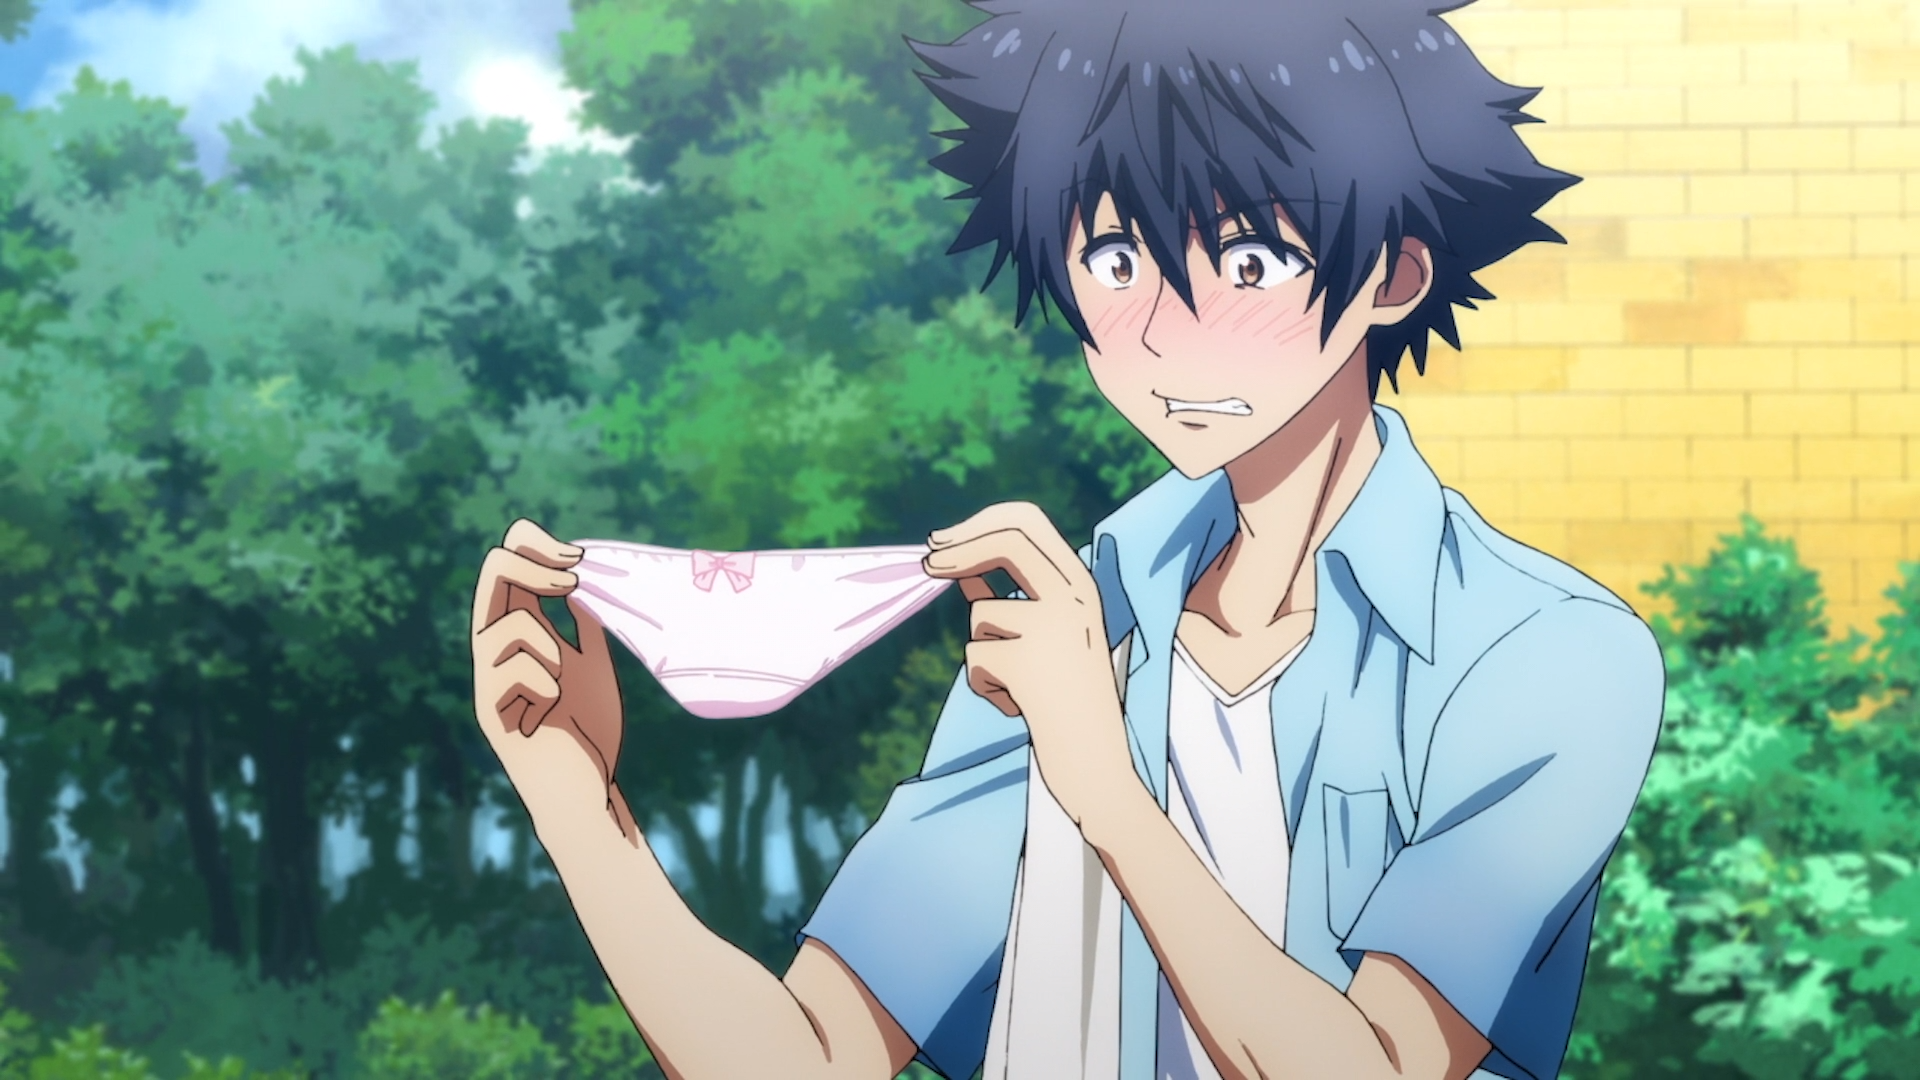 Setsuna is embarrassed to discover a pair of frilly pink panties during his laundry duties in a scene from the 2018 ISLAND TV anime.